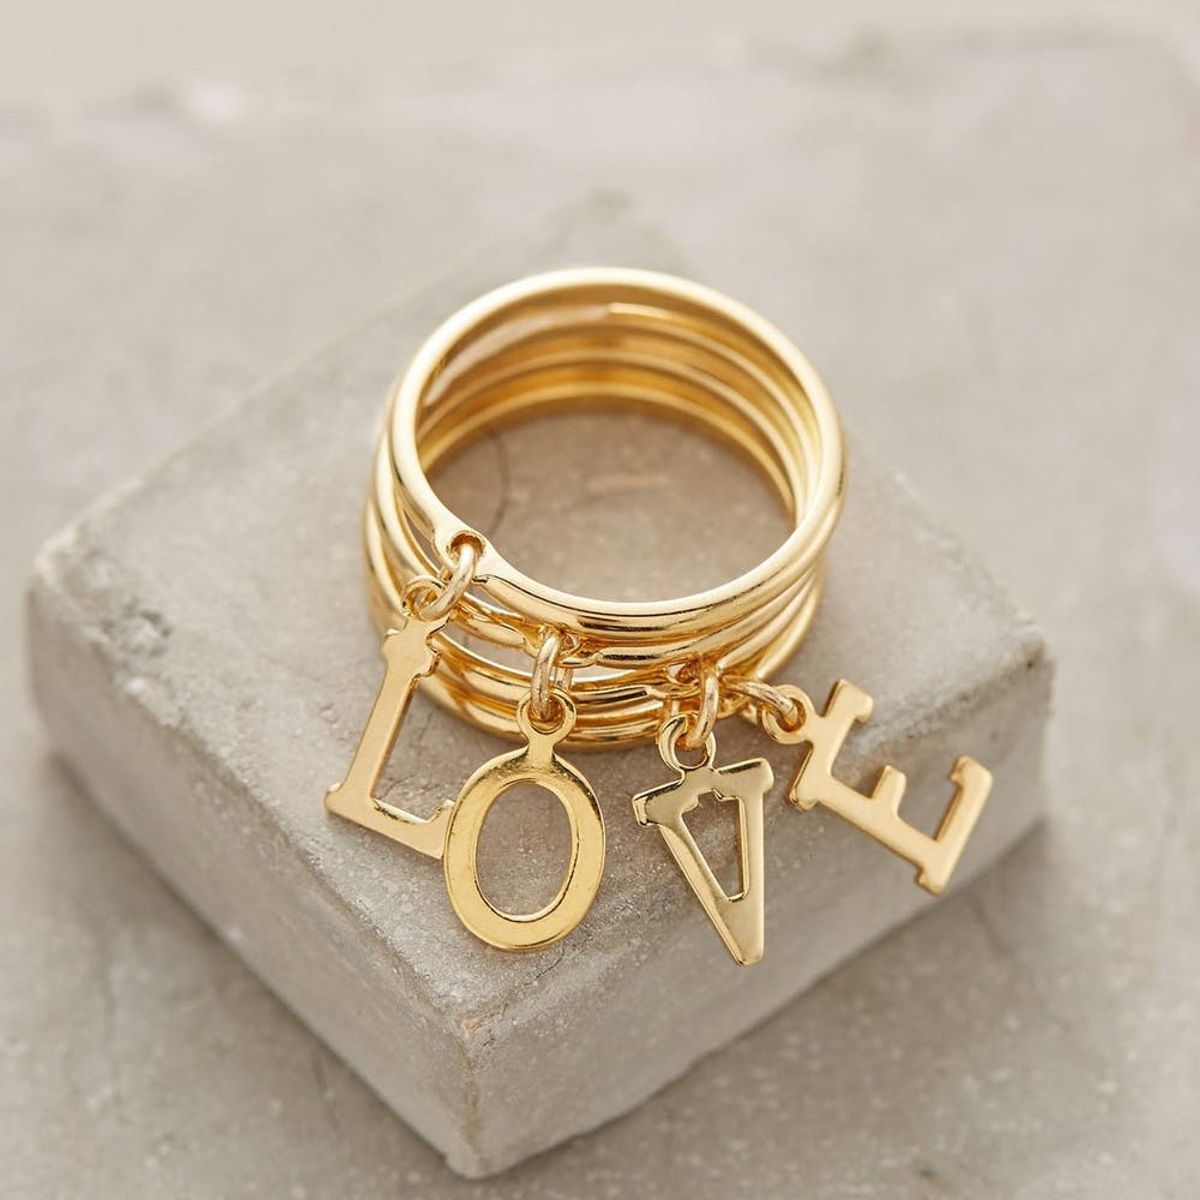 The Mother’s Day Gift Guide for Extra-Thoughtful Jewelry